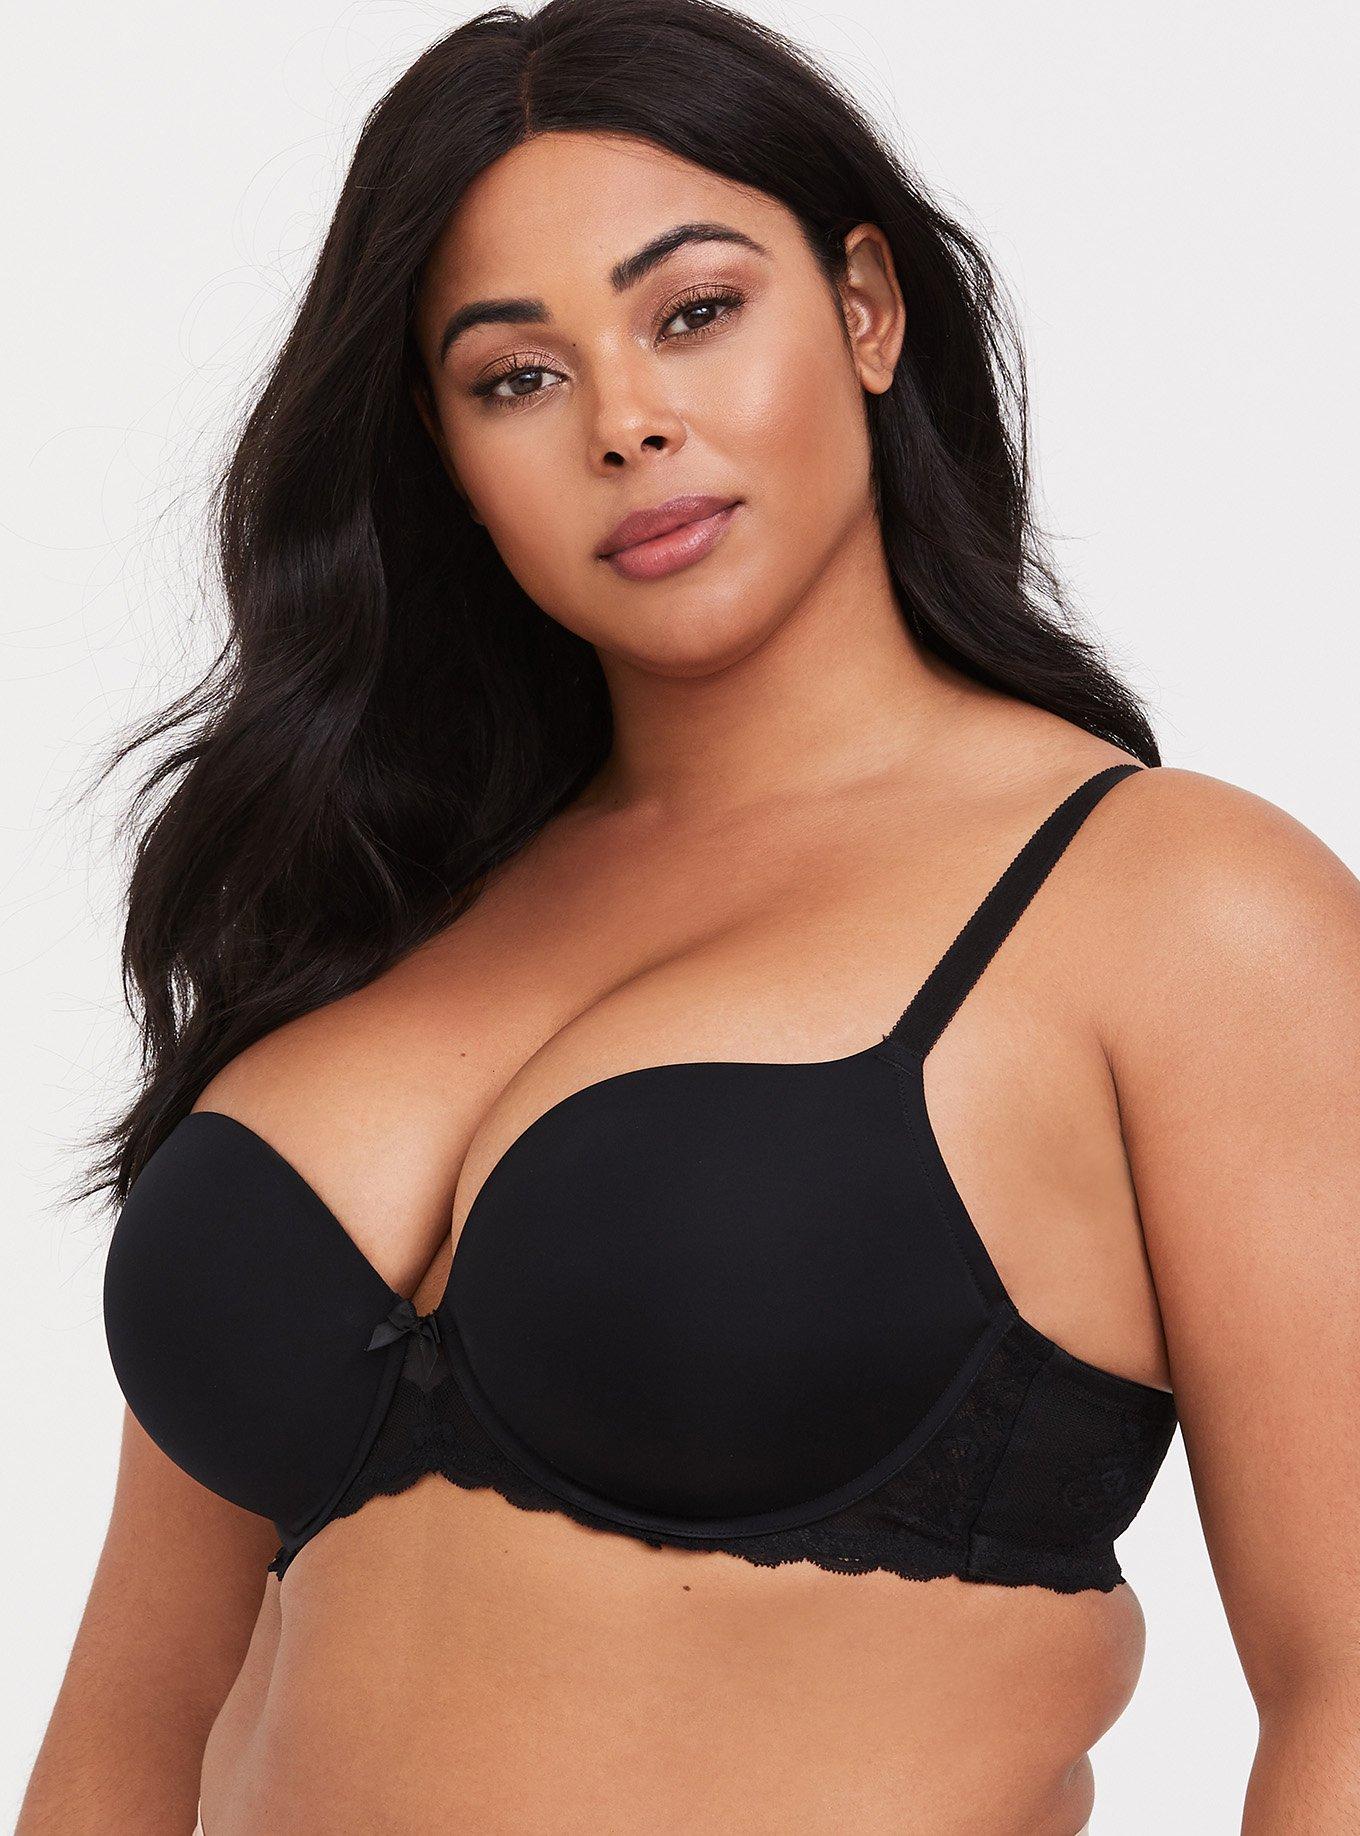 Best Strapless Plus Size Bra in an H Cup — Engineering FTW!